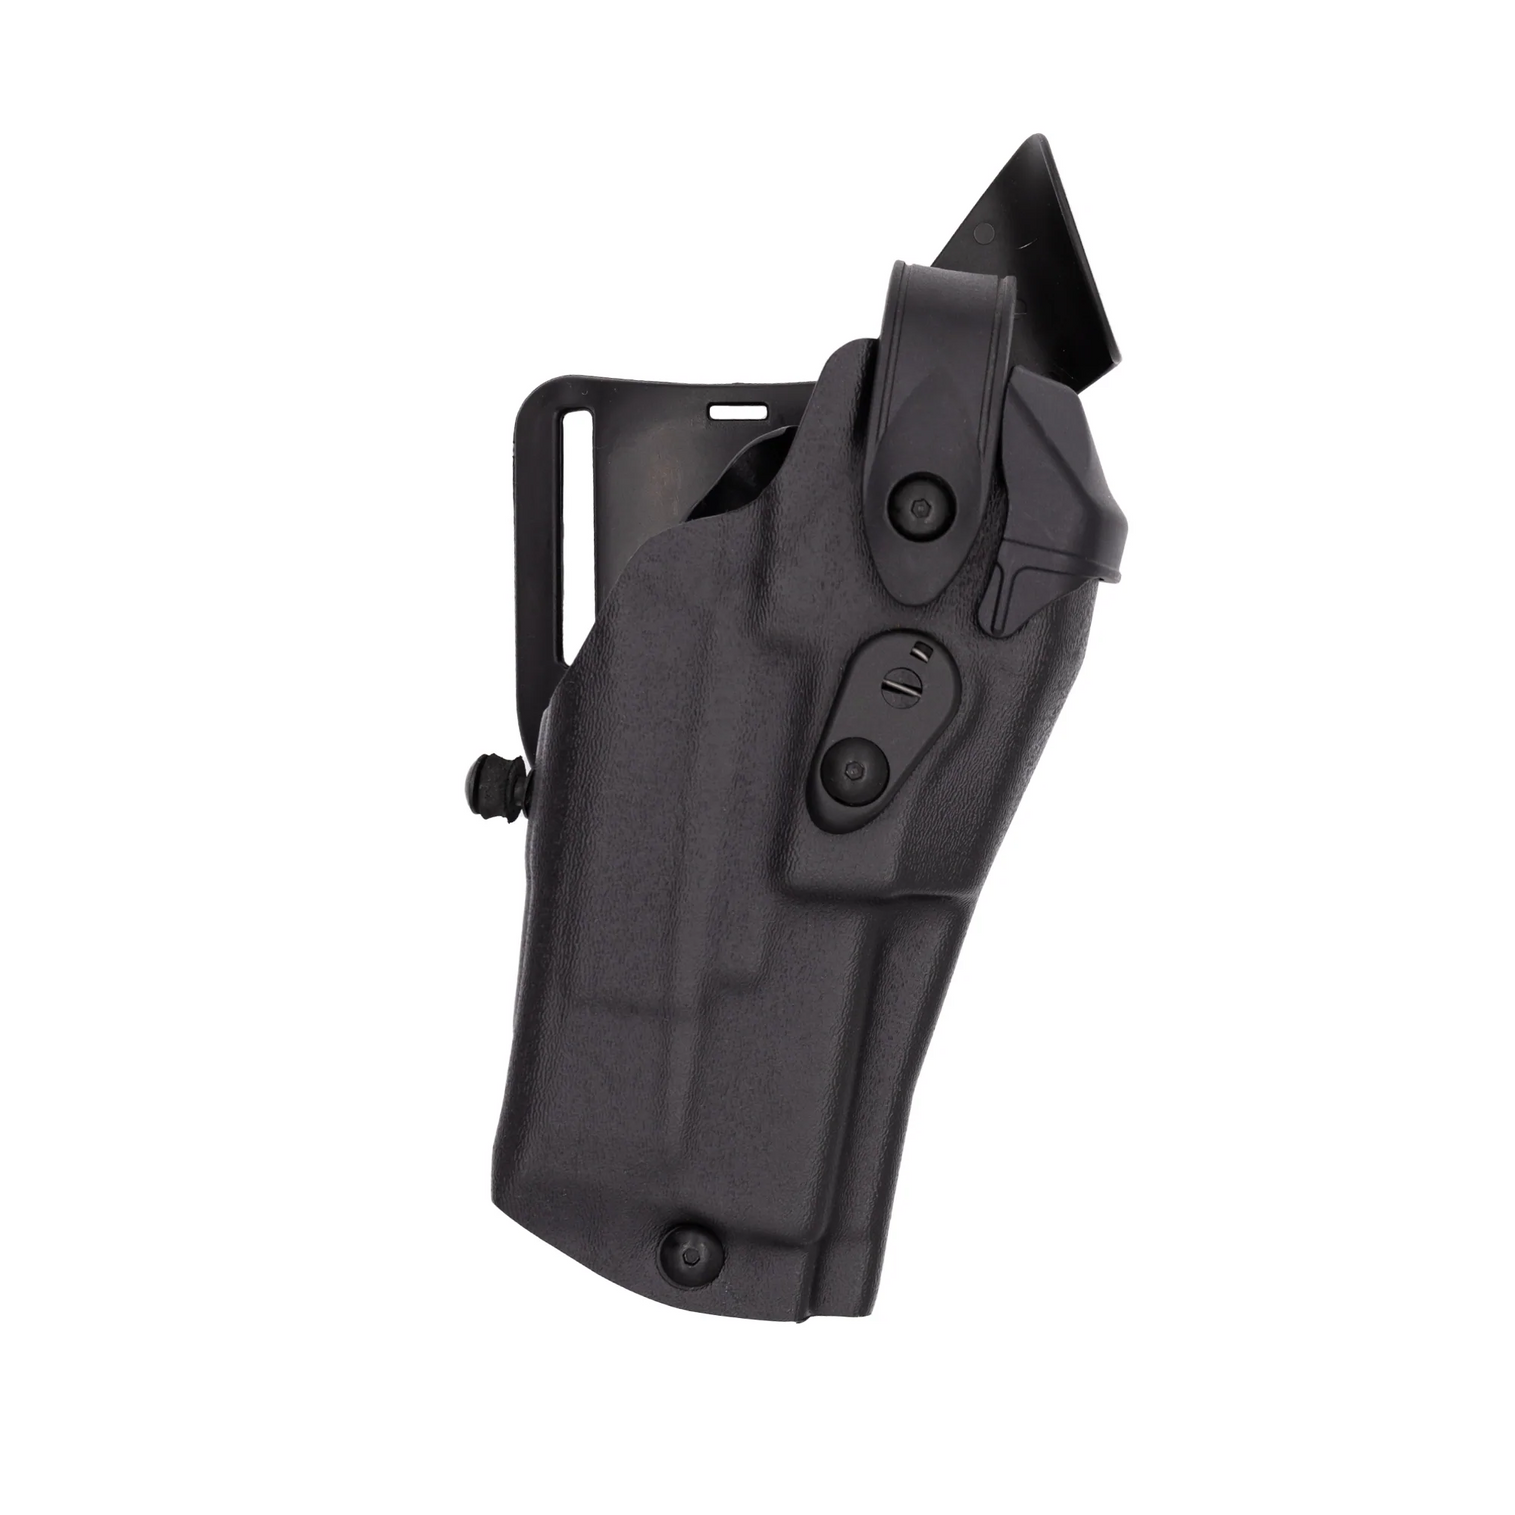 Model 6360rds Als/sls Mid-ride, Level Iii Retention Duty Holster For Sig Sauer P320 Rx 9 W/ Light - KR6360RDS-4502-412